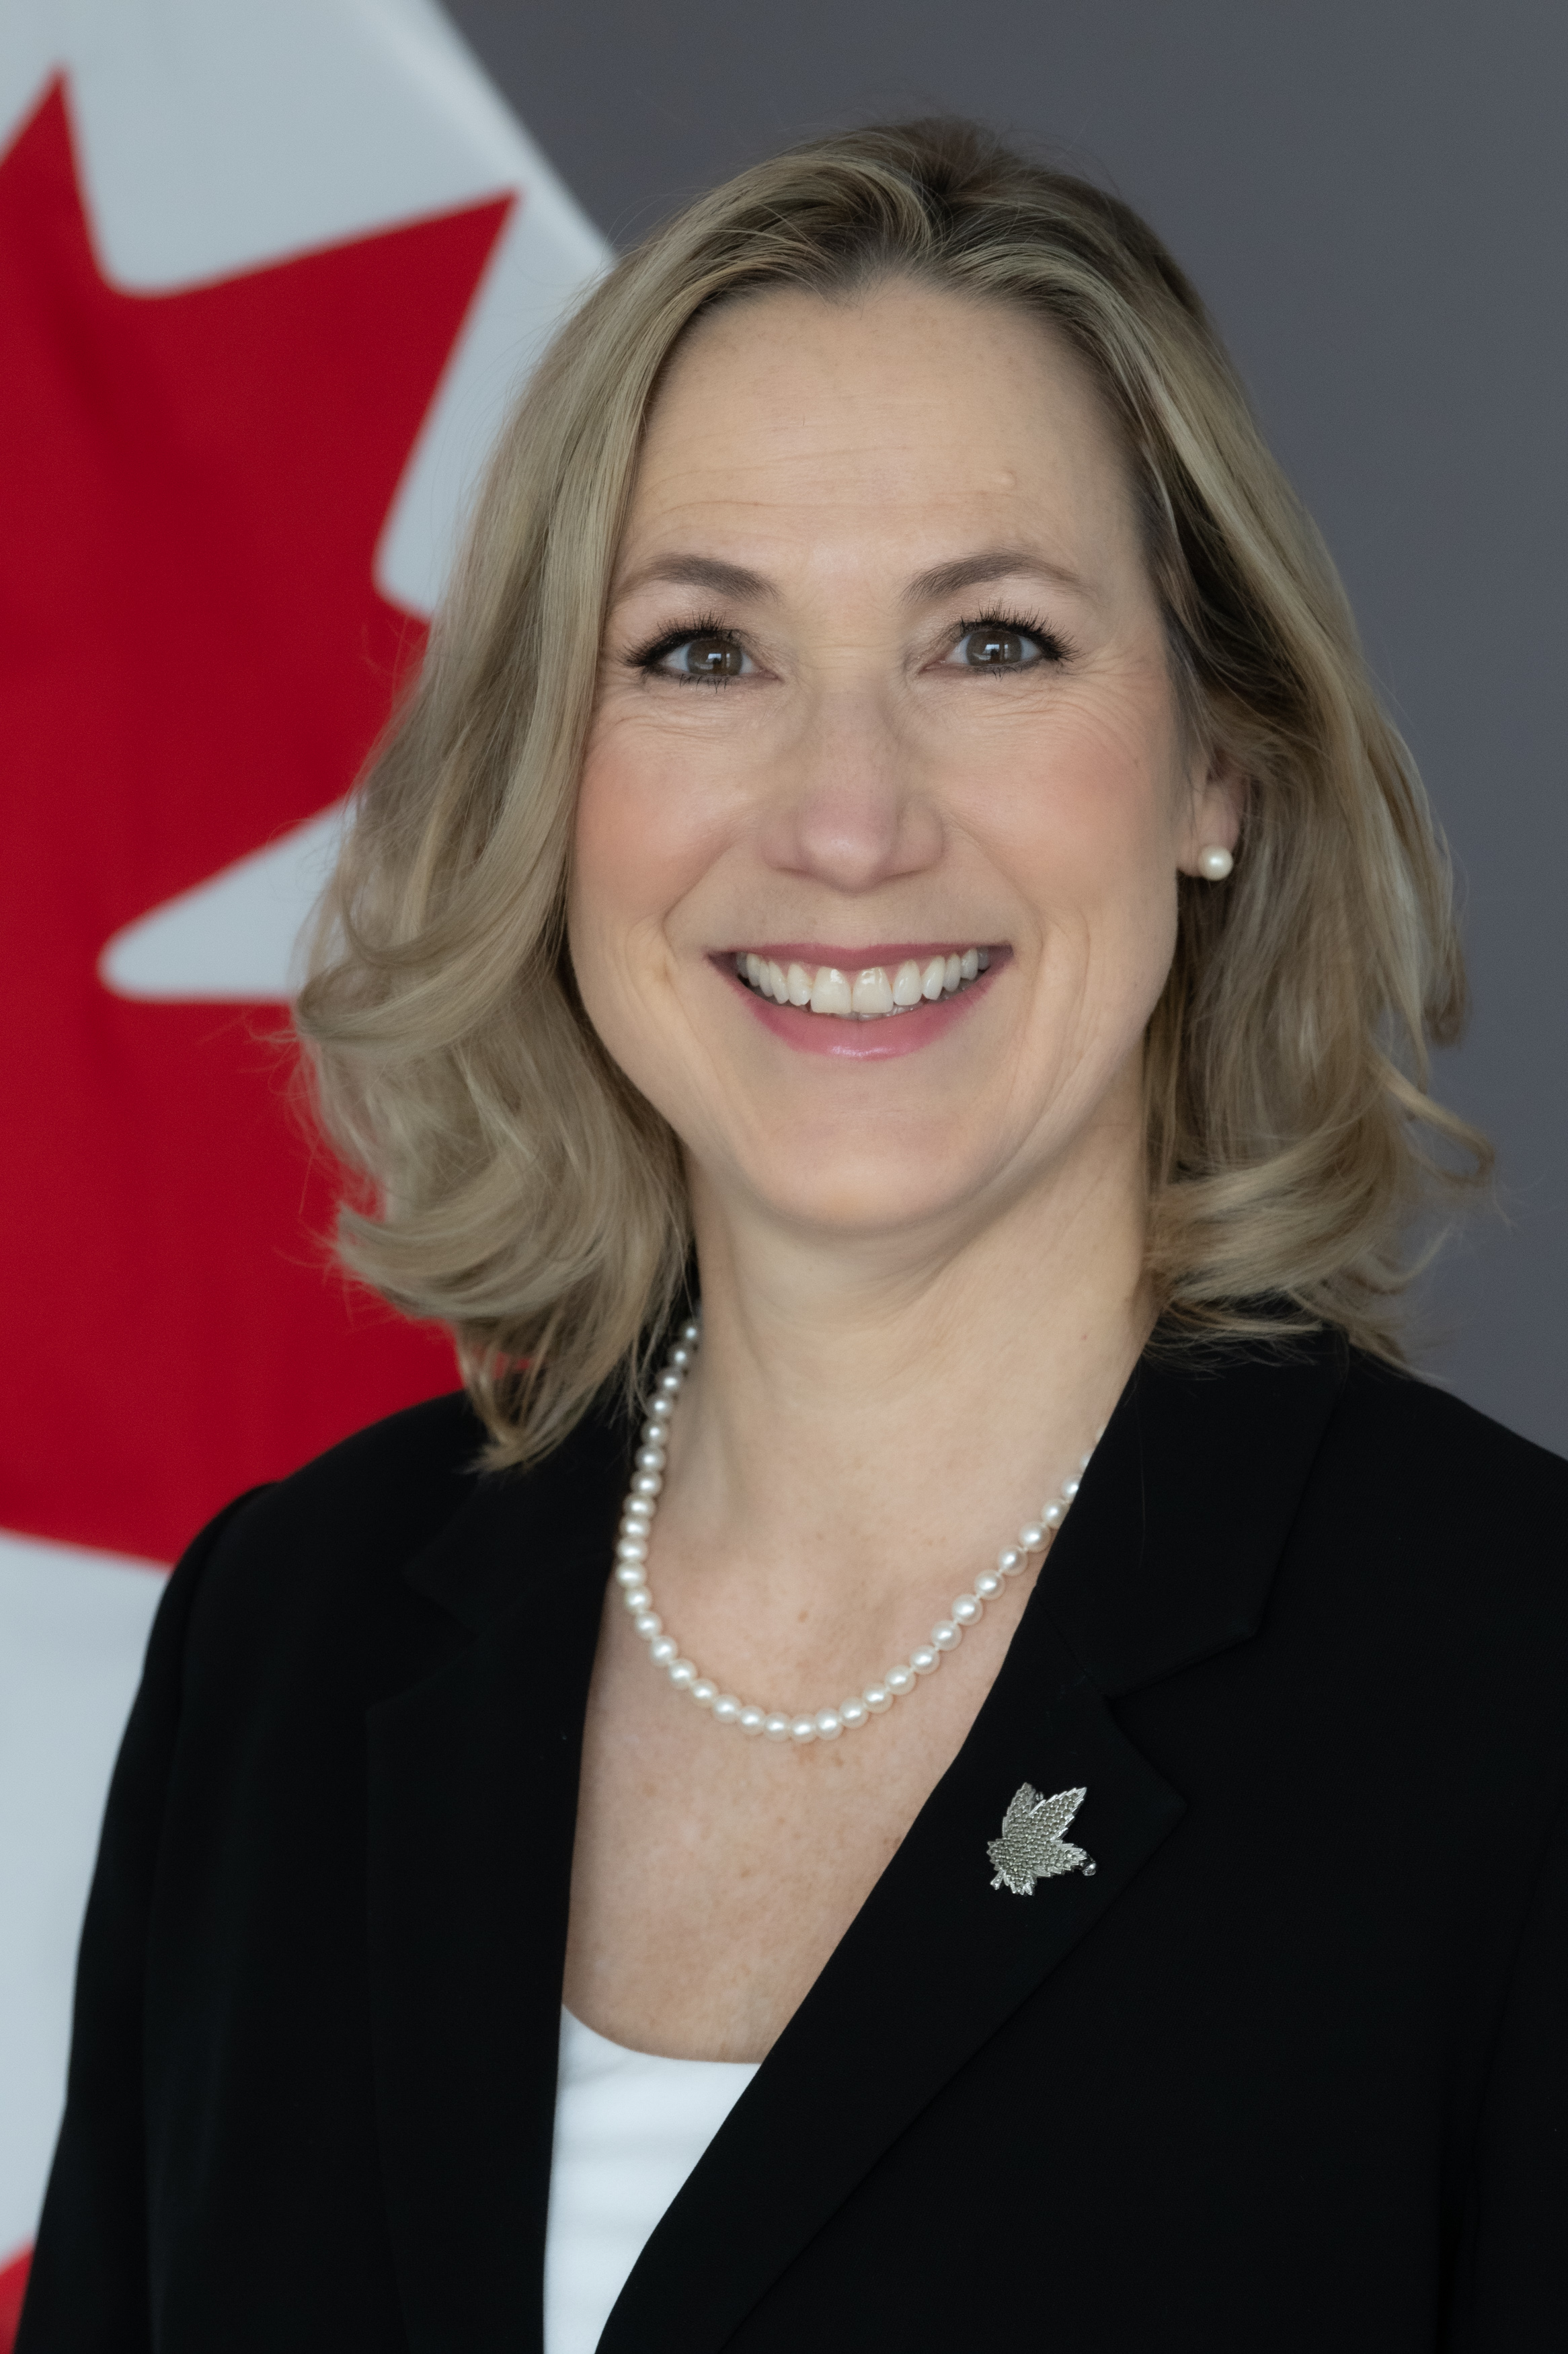 Kirsten Hillman, Ambassador of Canada to the United States